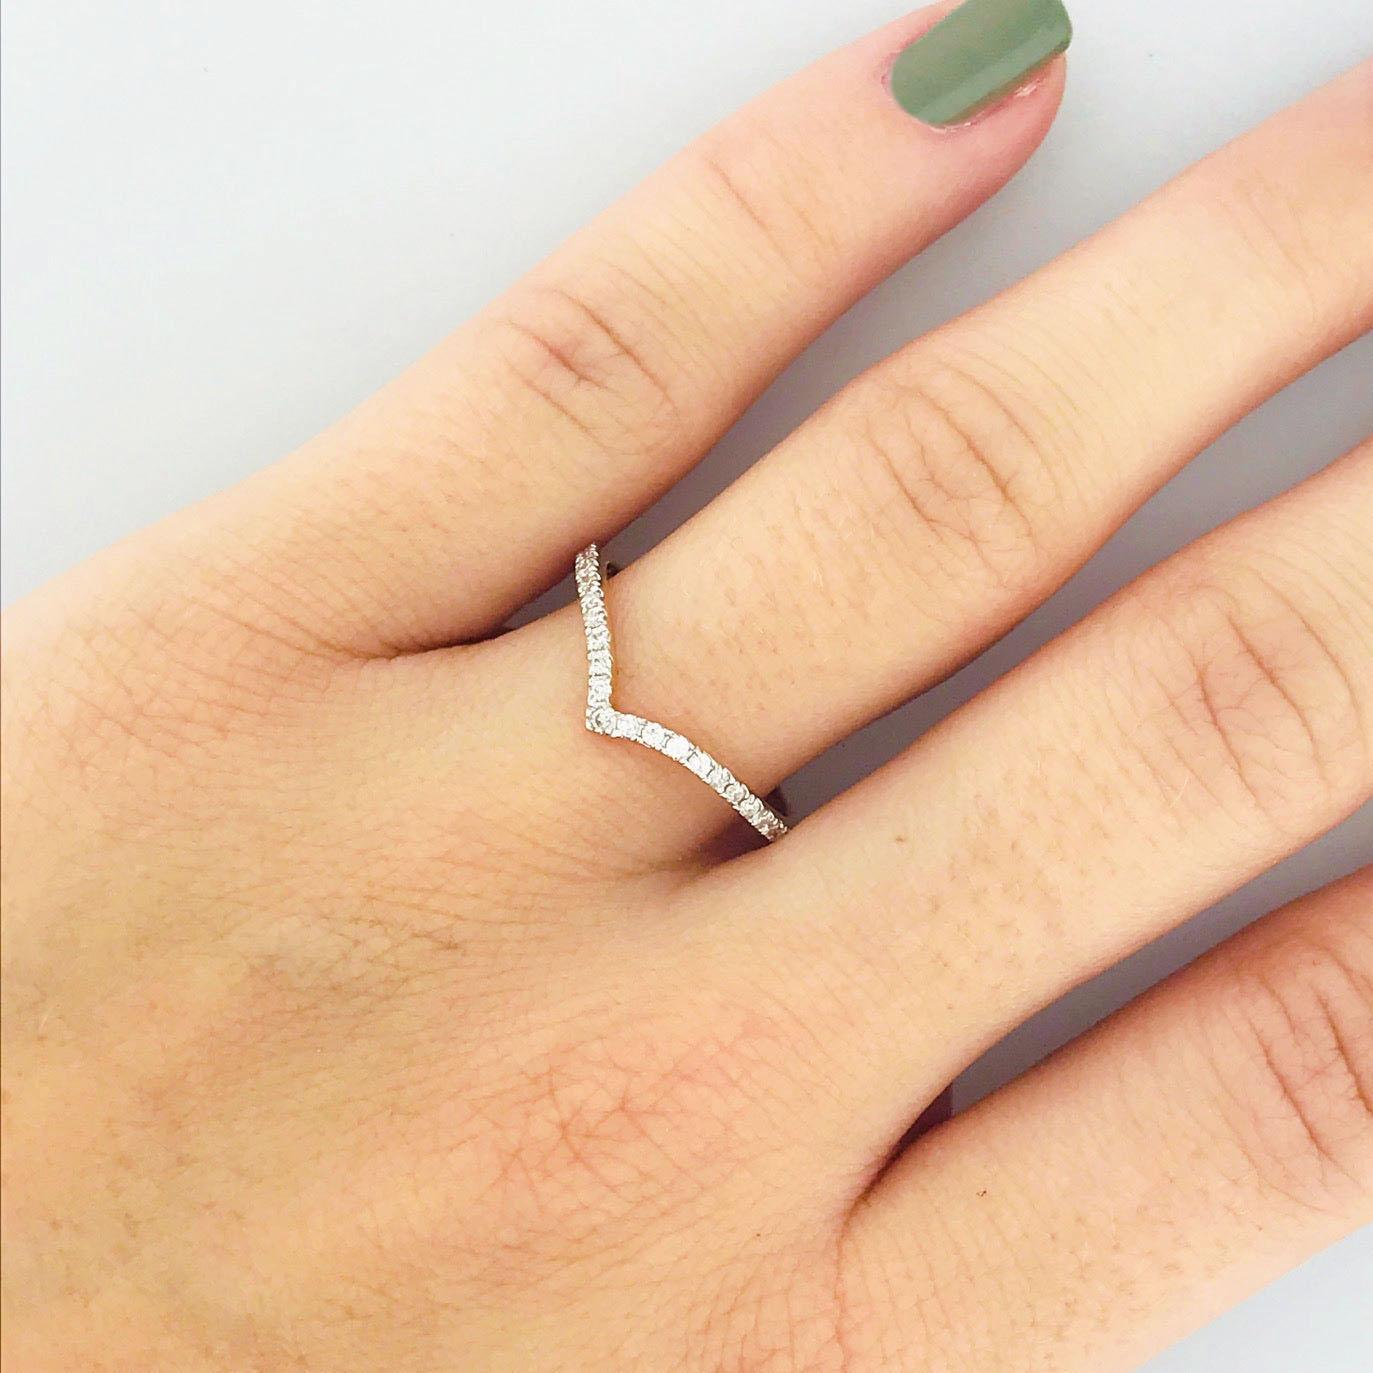 Diamond V Rings are a fabulous stacking band for your engagement ring! This band ring is classy, modern and has a beautiful clean line minimalism. It is a great piece for anyone who loves the dainty look, or likes to customize their jewelry